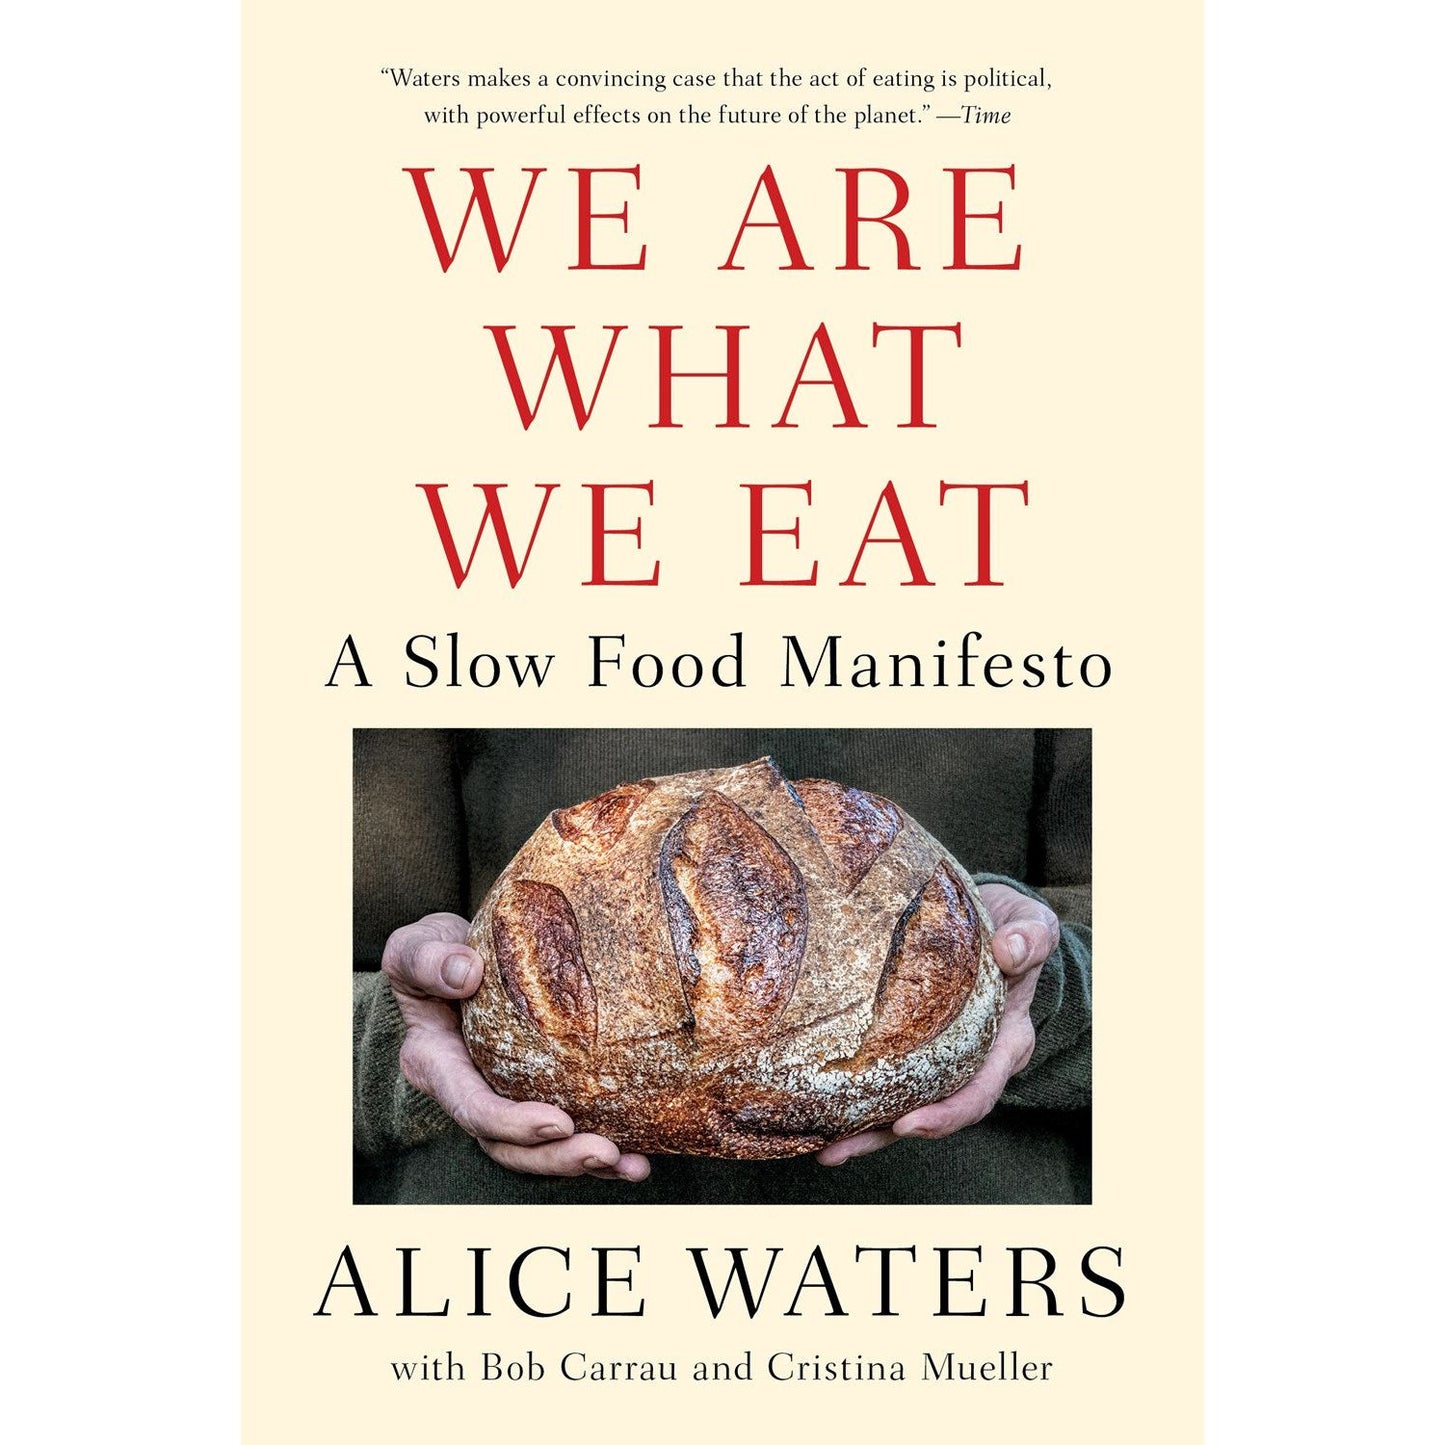 We Are What We Eat (Alice Waters)